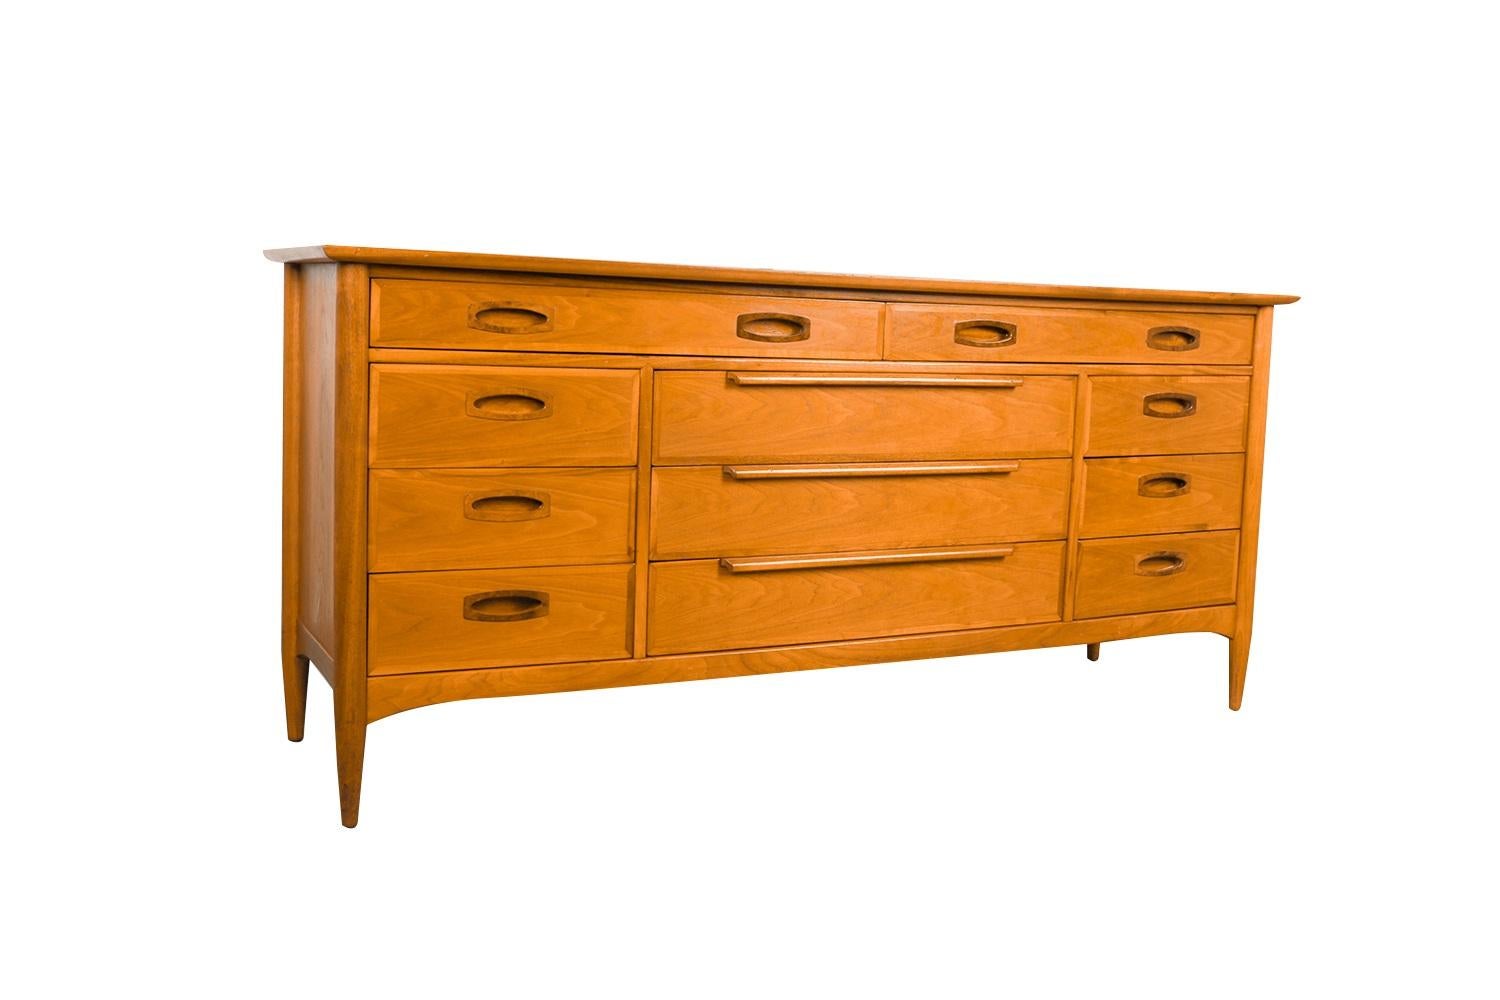 A gorgeous Mid-Century Modern, walnut dresser by Heritage, a leading American furniture designer for over four decades. A beautiful dresser precisely crafted in a rich walnut. Minimalist Danish Modern inspired profile, with exceptional construction